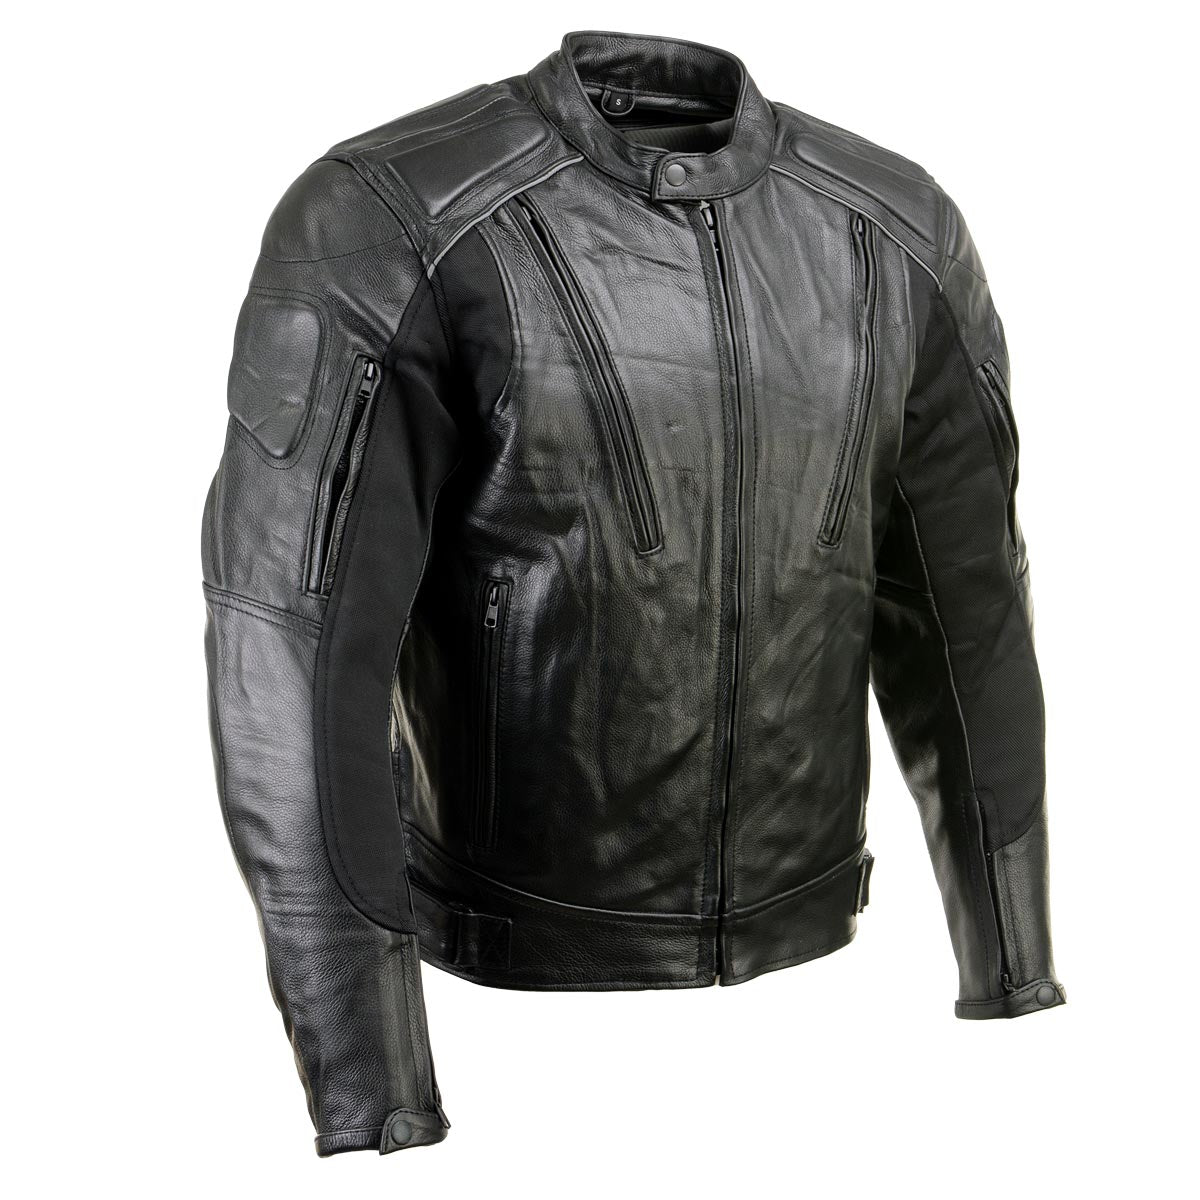 Xelement B9119 Men's 'Frenzy' Black Armored Leather Motorcycle Jacket